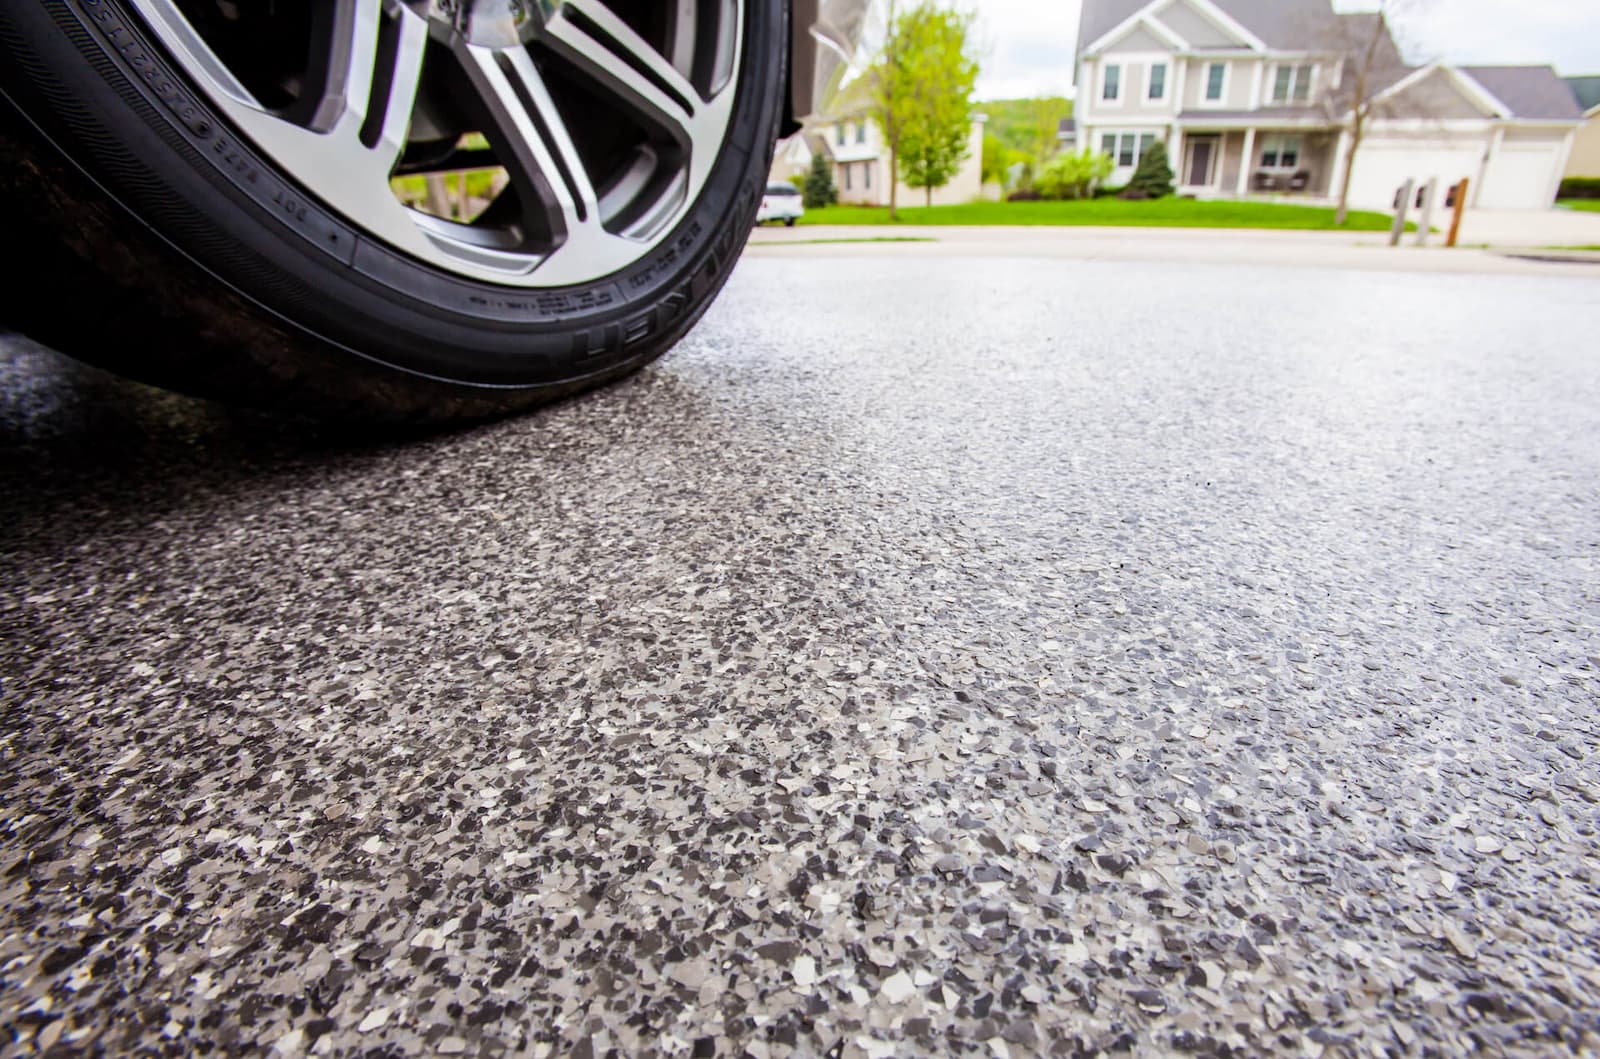 driveway wheel - Make Your Neighbors Jealous: Transform Your Tennessee Property with New Concrete Coatings